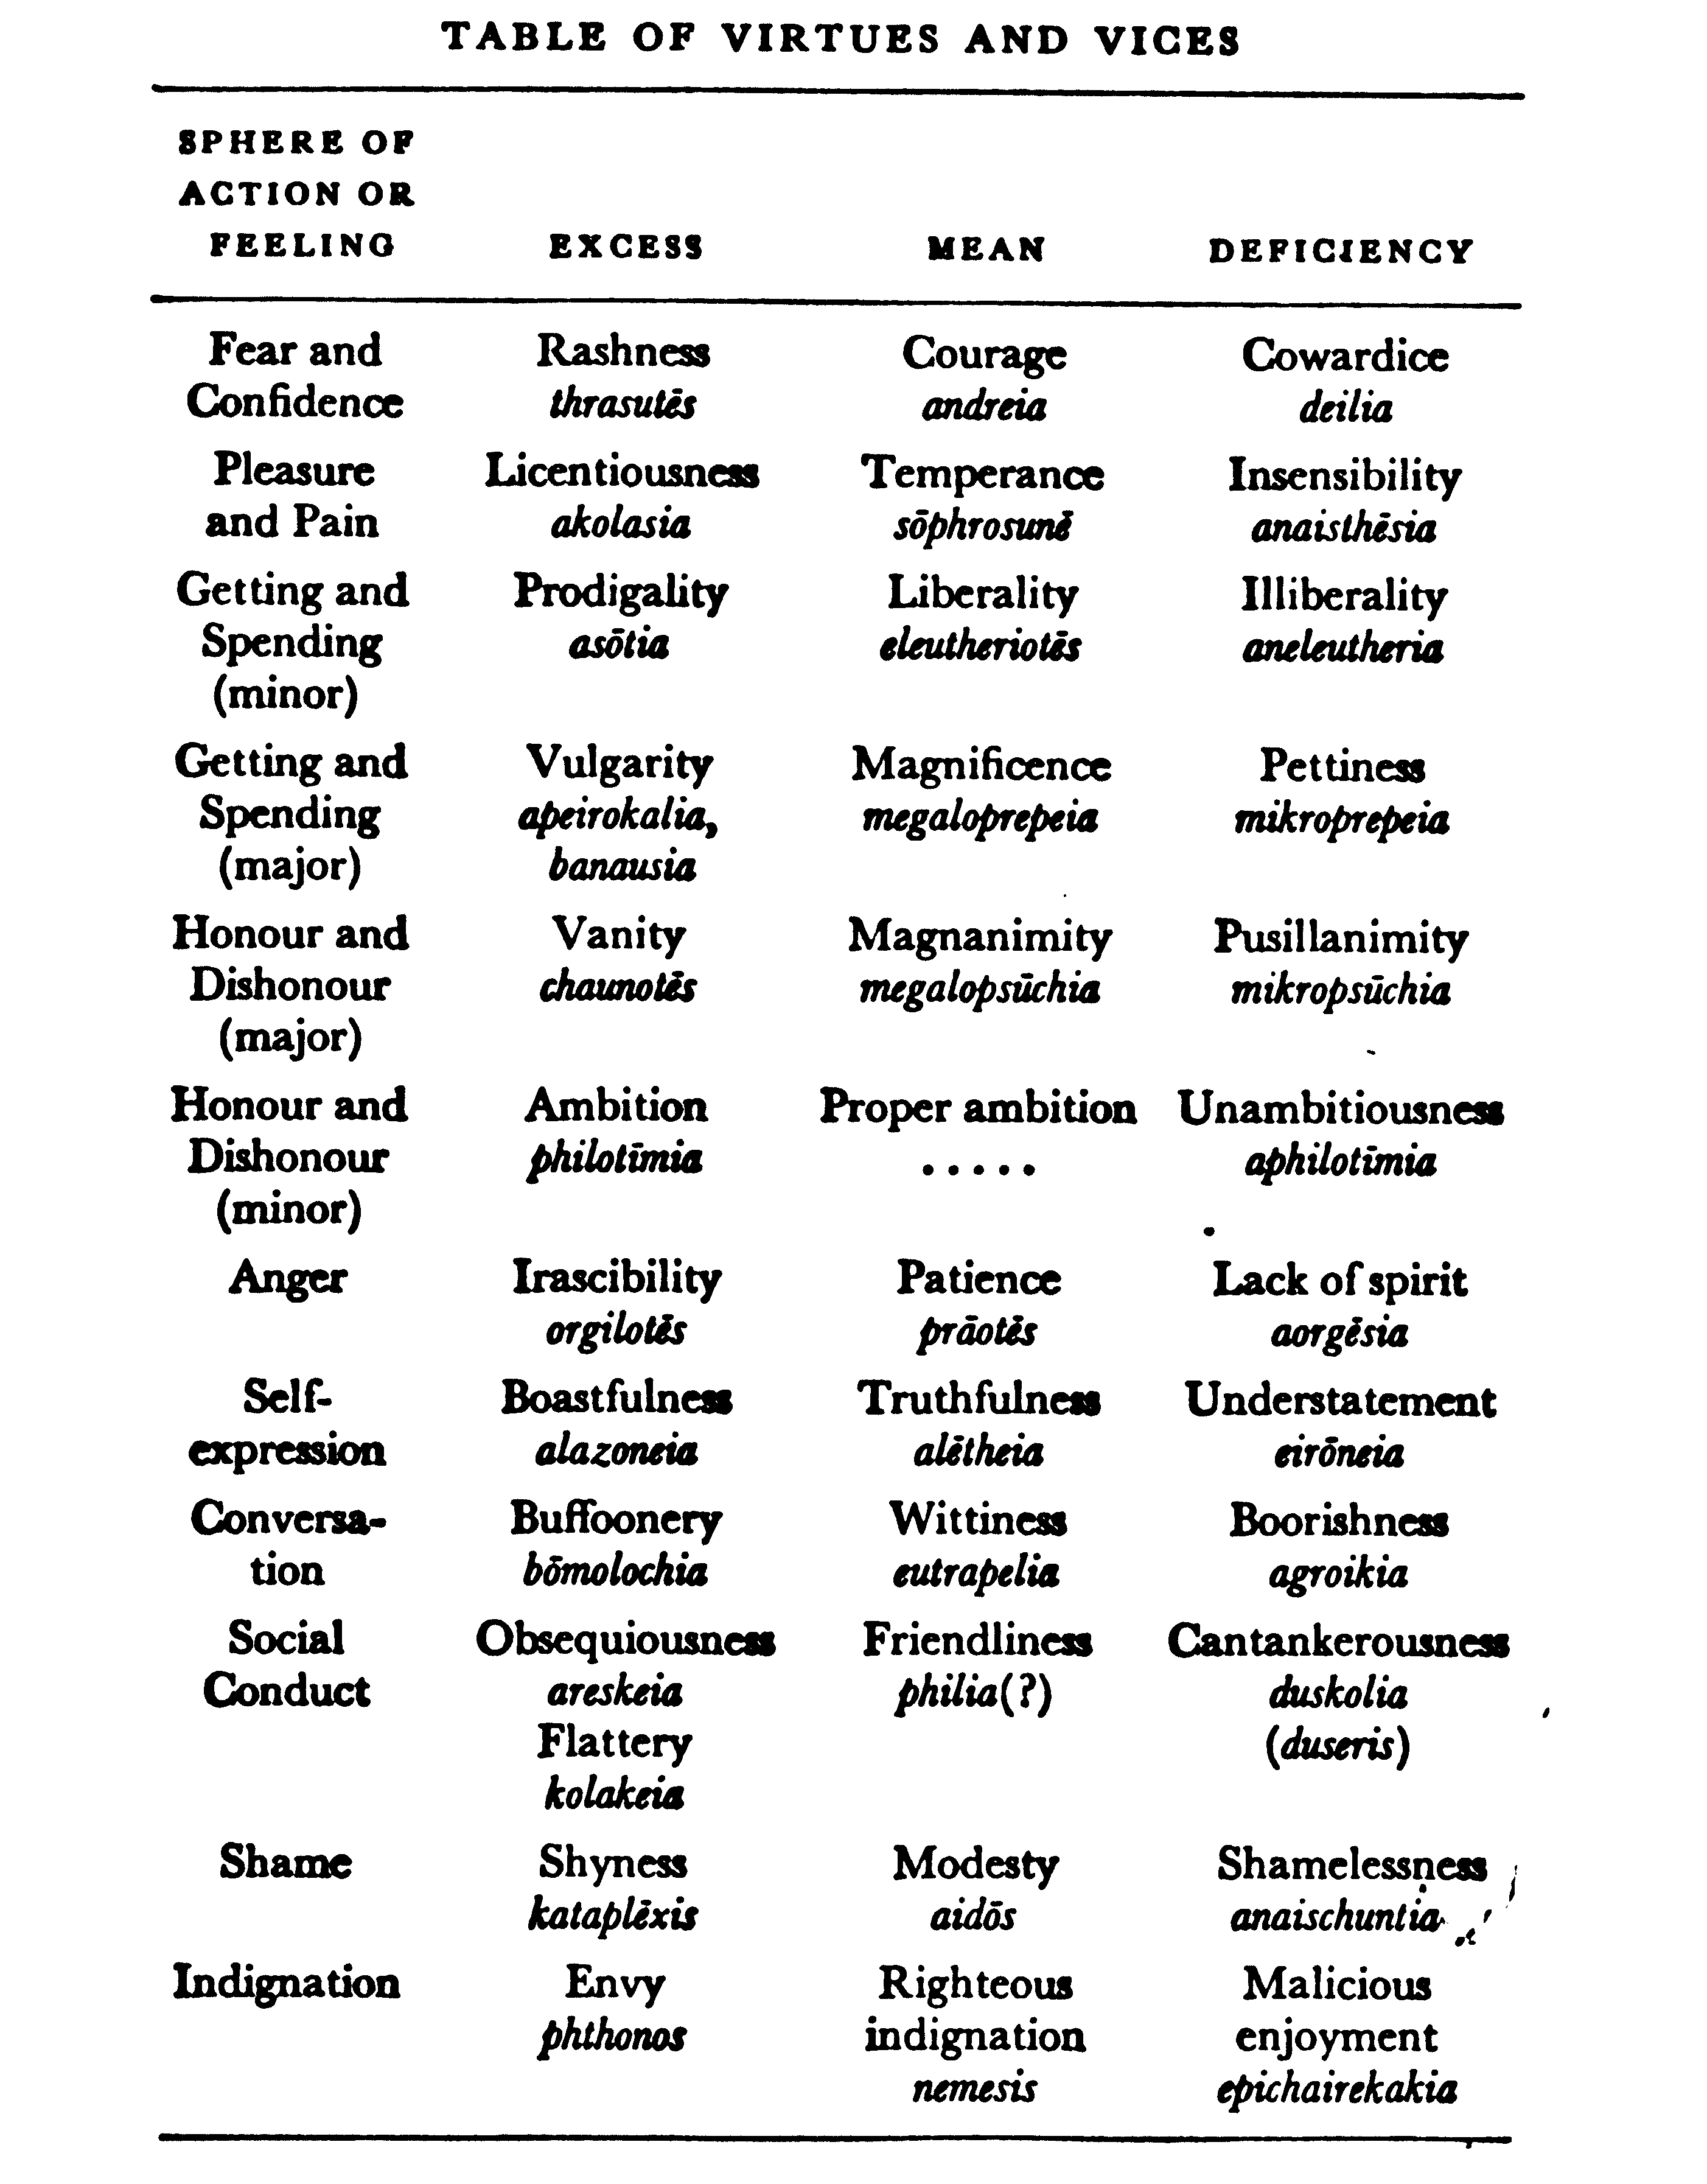 list of virtues and vices aristotle